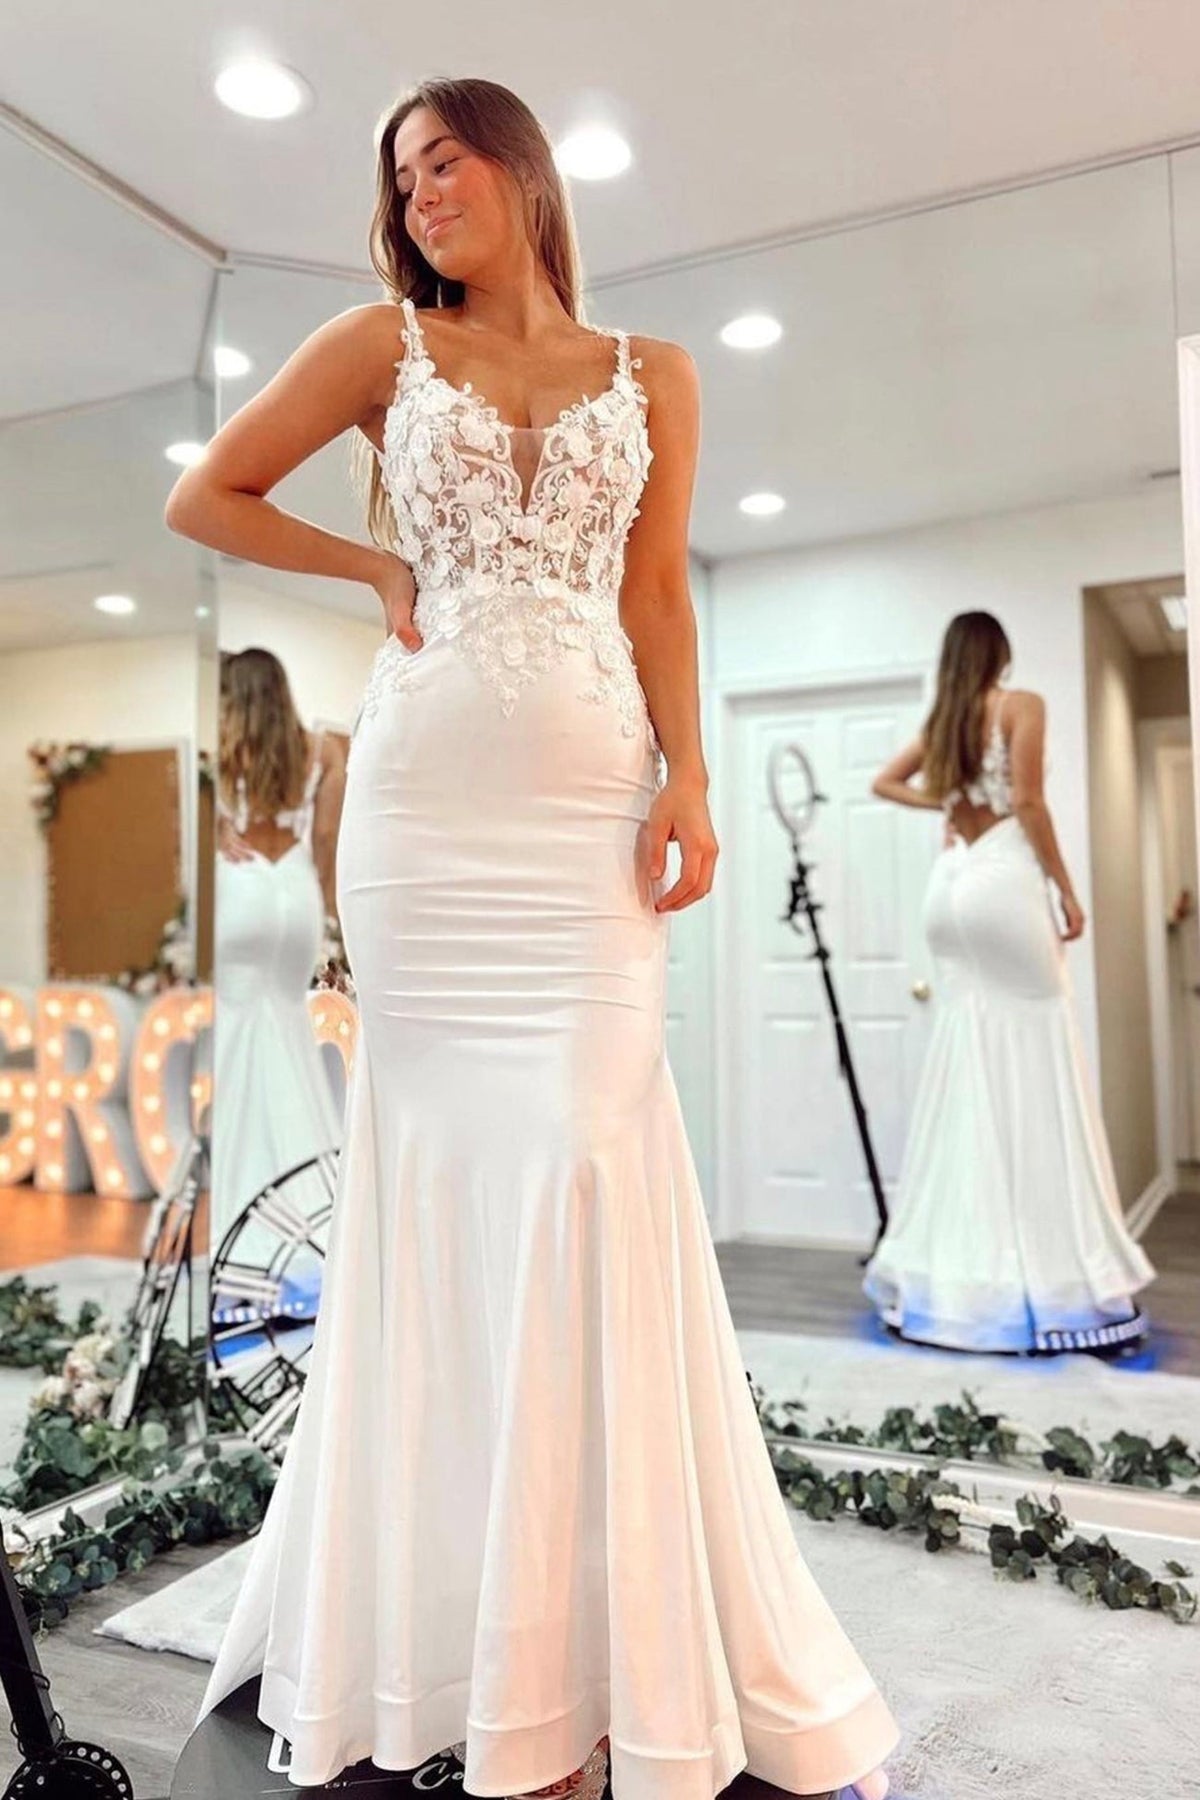 Ethnic Gowns | Beautiful White Princess Gown | Freeup